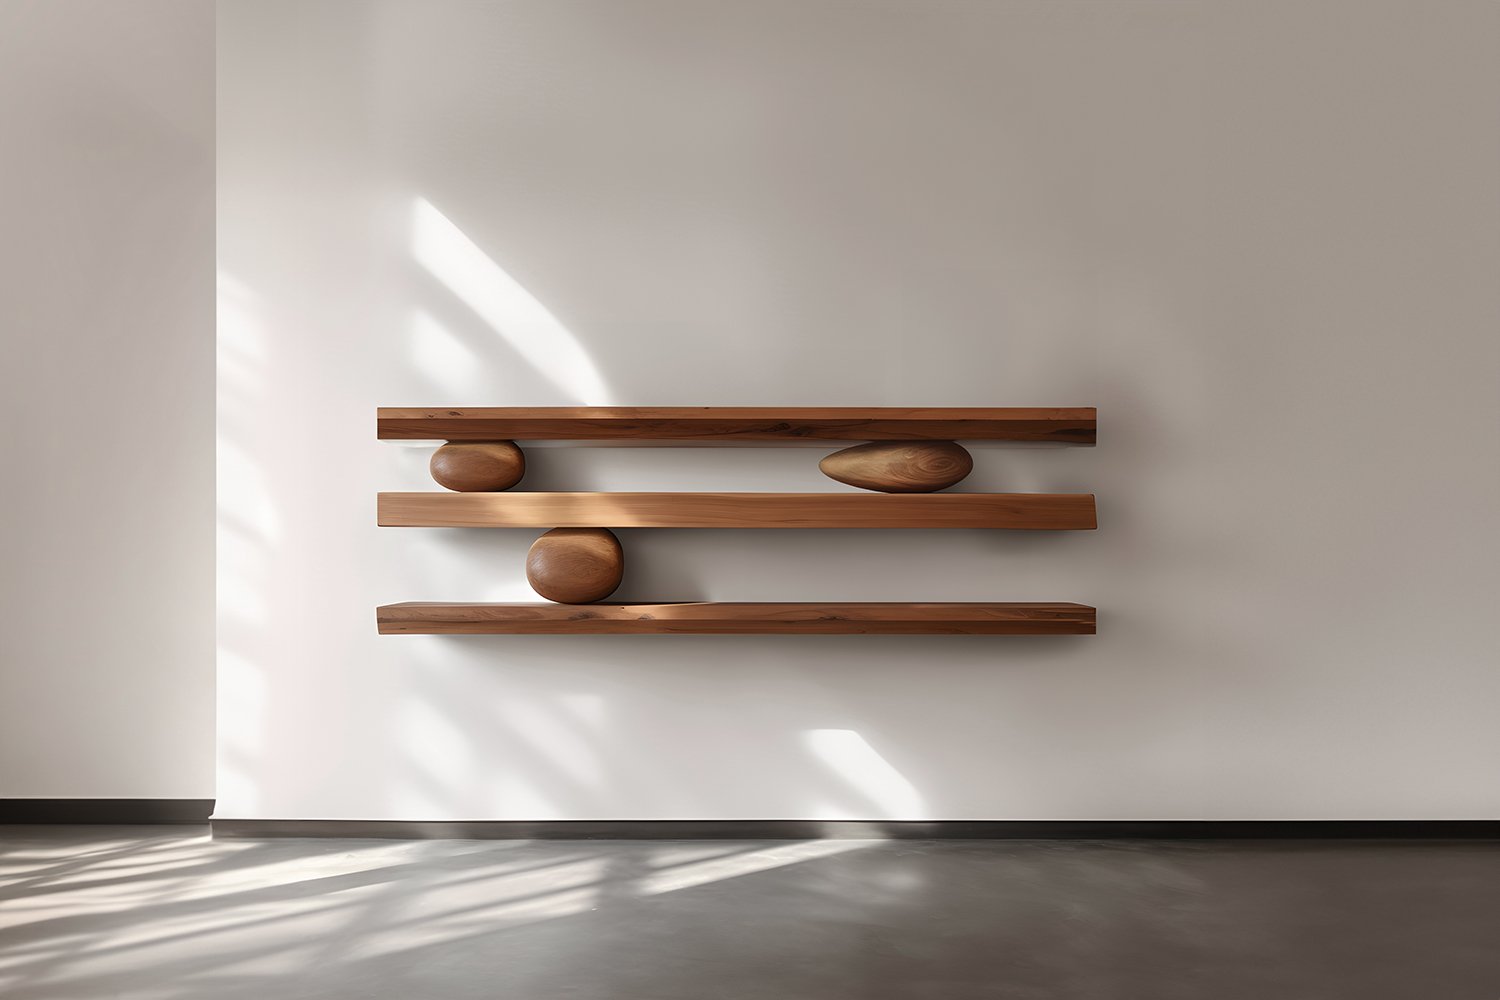 Set of Three Floating Shelves with Three Sculptural Wooden Pebble Accents, Sereno by Joel Escalona — 3.jpg